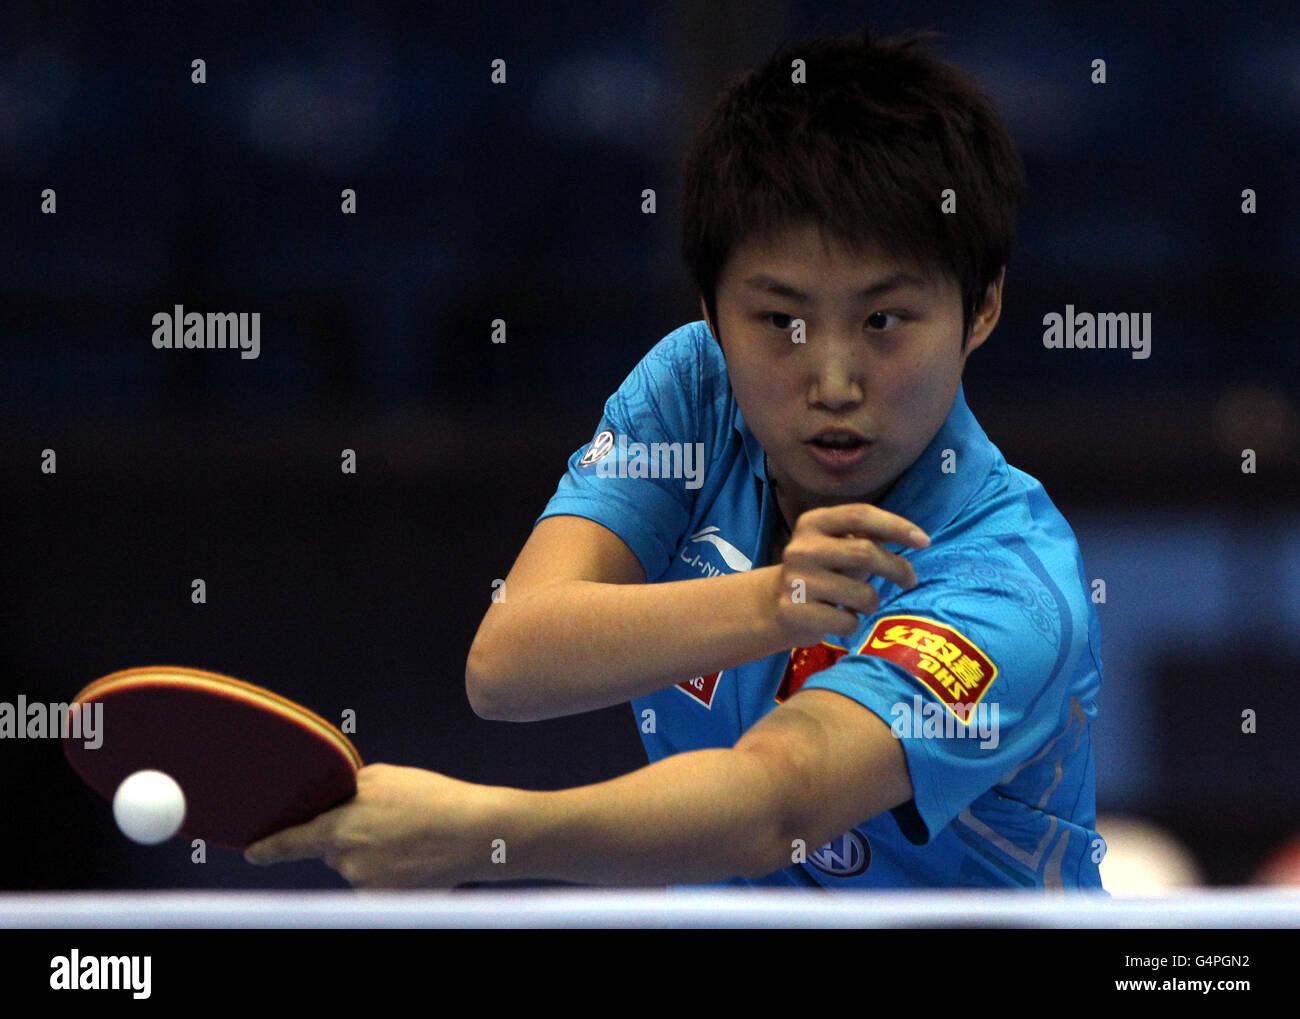 Olympics - Table Tennis - London 2012 Test Event - ITTF Pro Tour Grand Finals - Day Two - Excel Arena. China's Guo Yue during her quarter final defeat to China's Liu Shiwen during the ITTF Pro Tour Grand Finals at the Excel Arena, London. Stock Photo